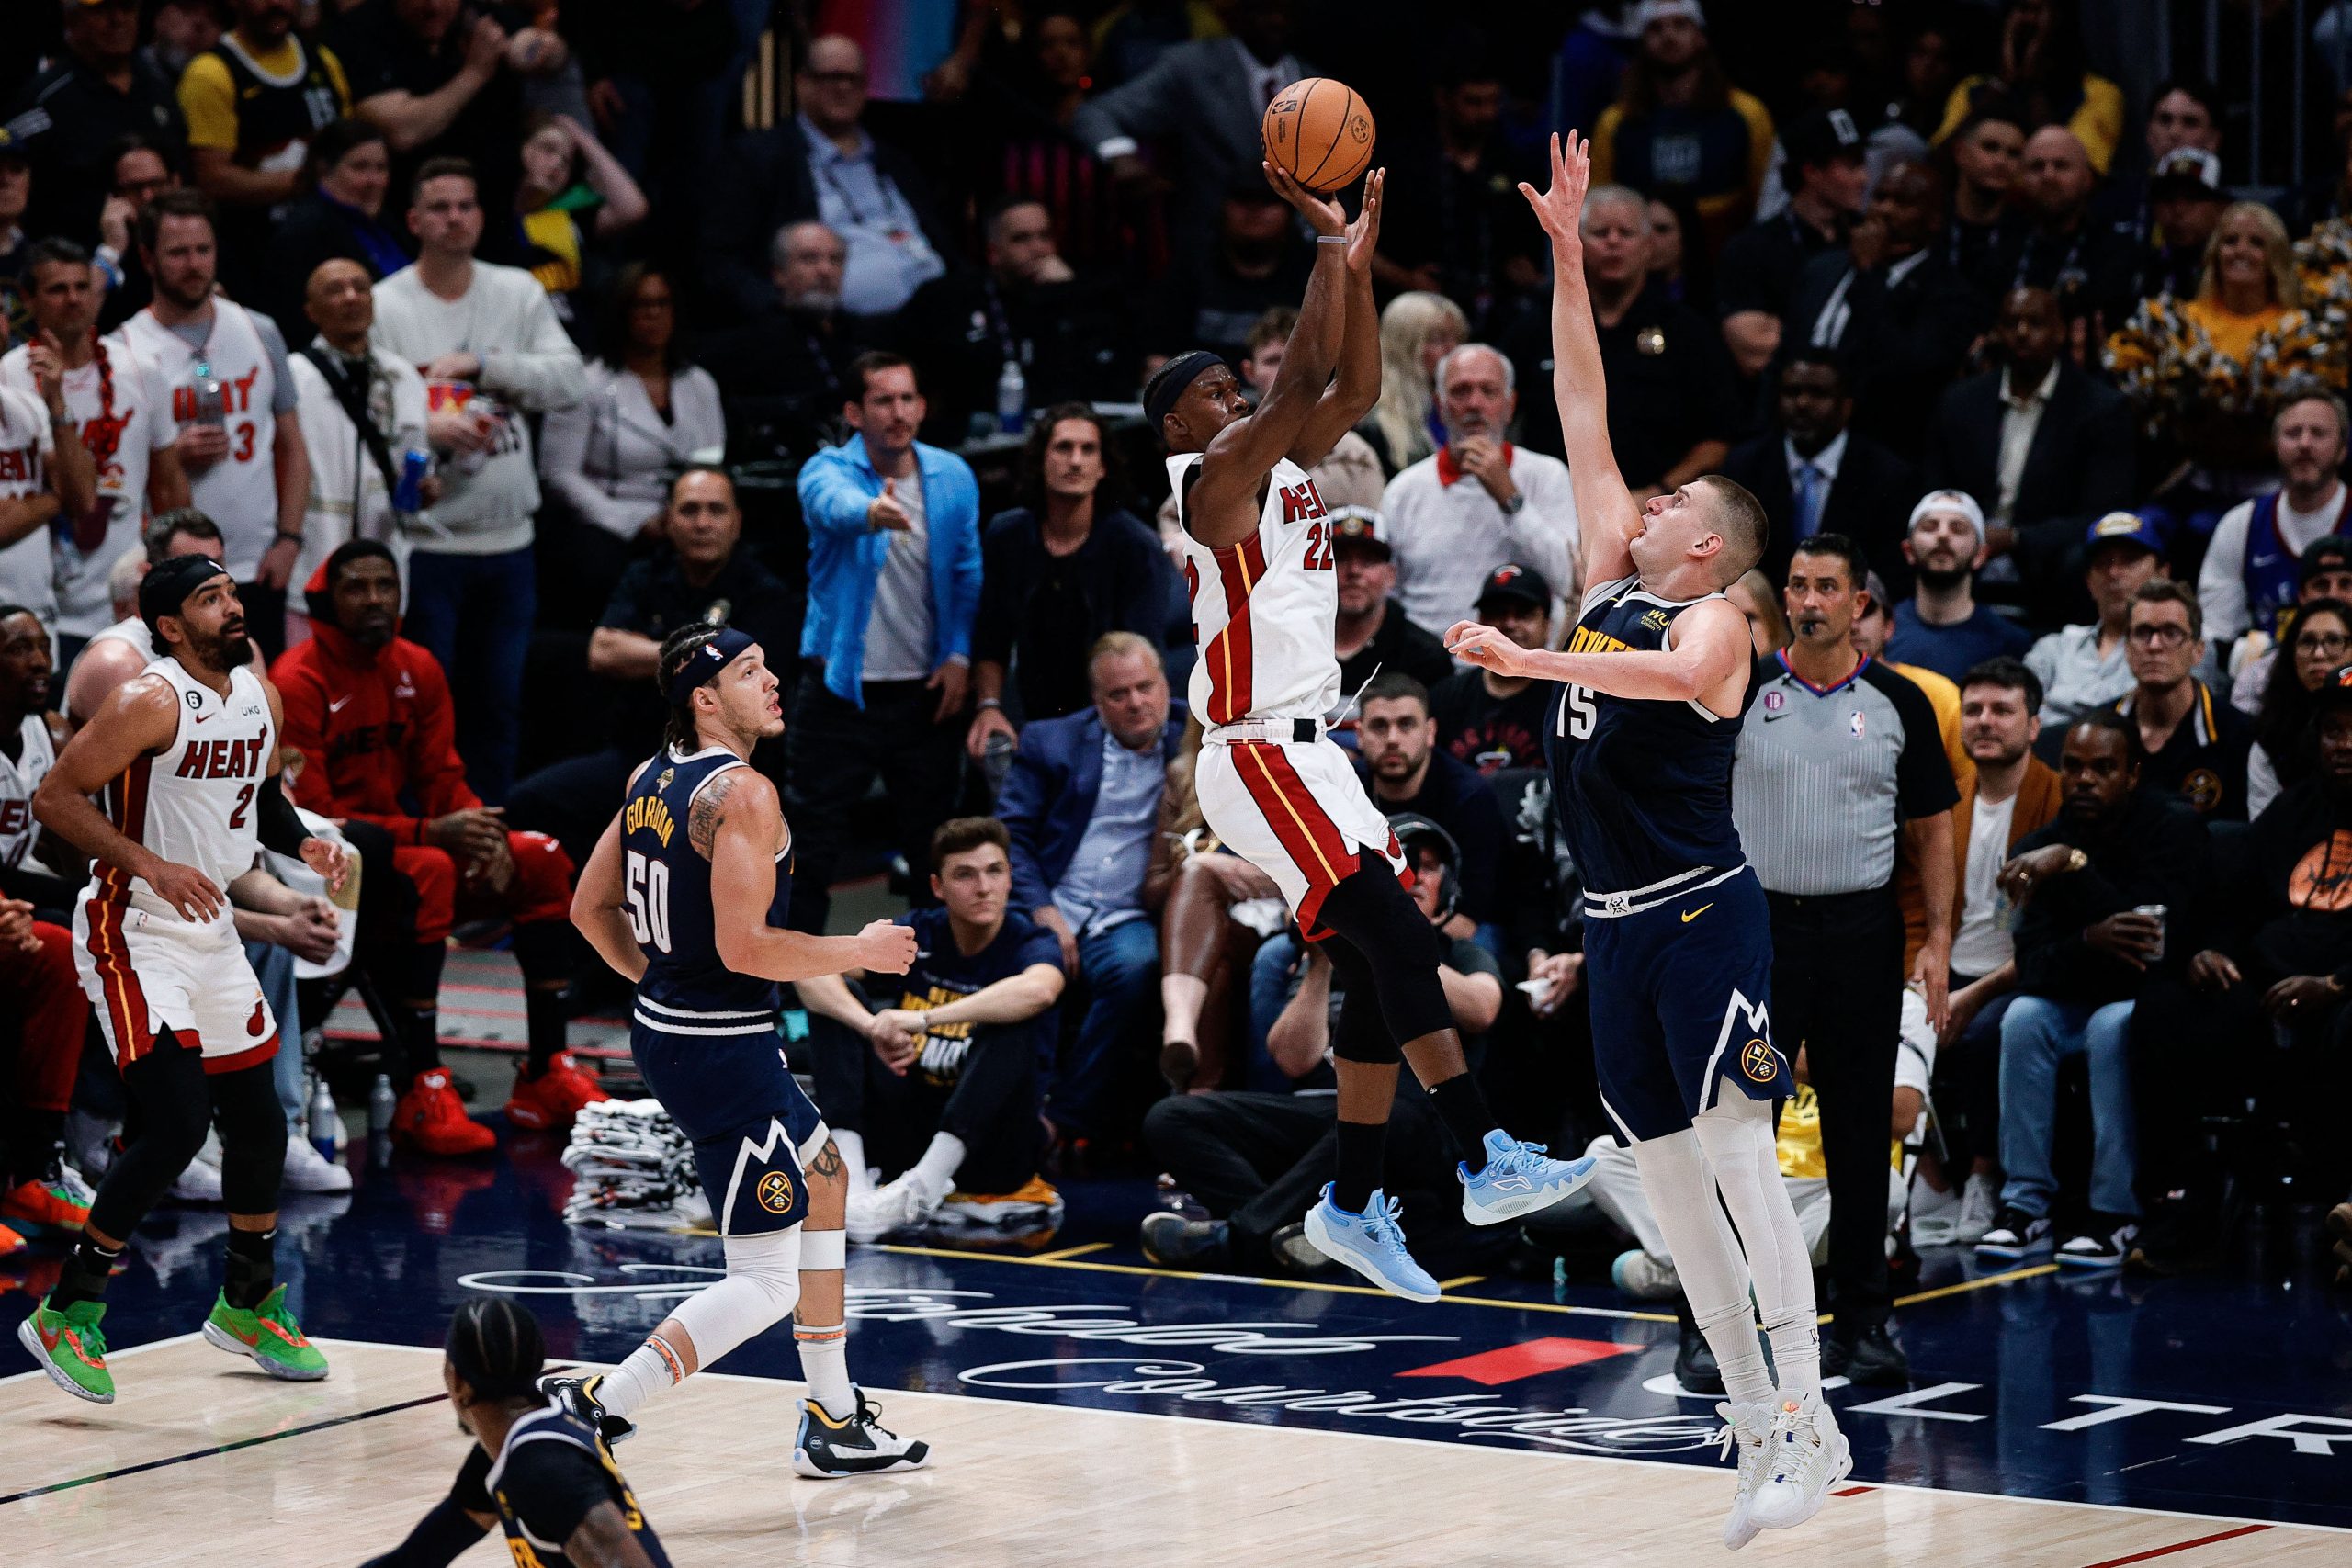 Jun 4, 2023; Denver, CO, USA; Miami Heat forward Jimmy Butler (22) takes a shot against Denver Nuggets center Nikola Jokic (15) in the second quarter in game two of the 2023 NBA Finals at Ball Arena. Mandatory Credit: Isaiah J. Downing-USA TODAY Sports Photo: Isaiah J. Downing/REUTERS